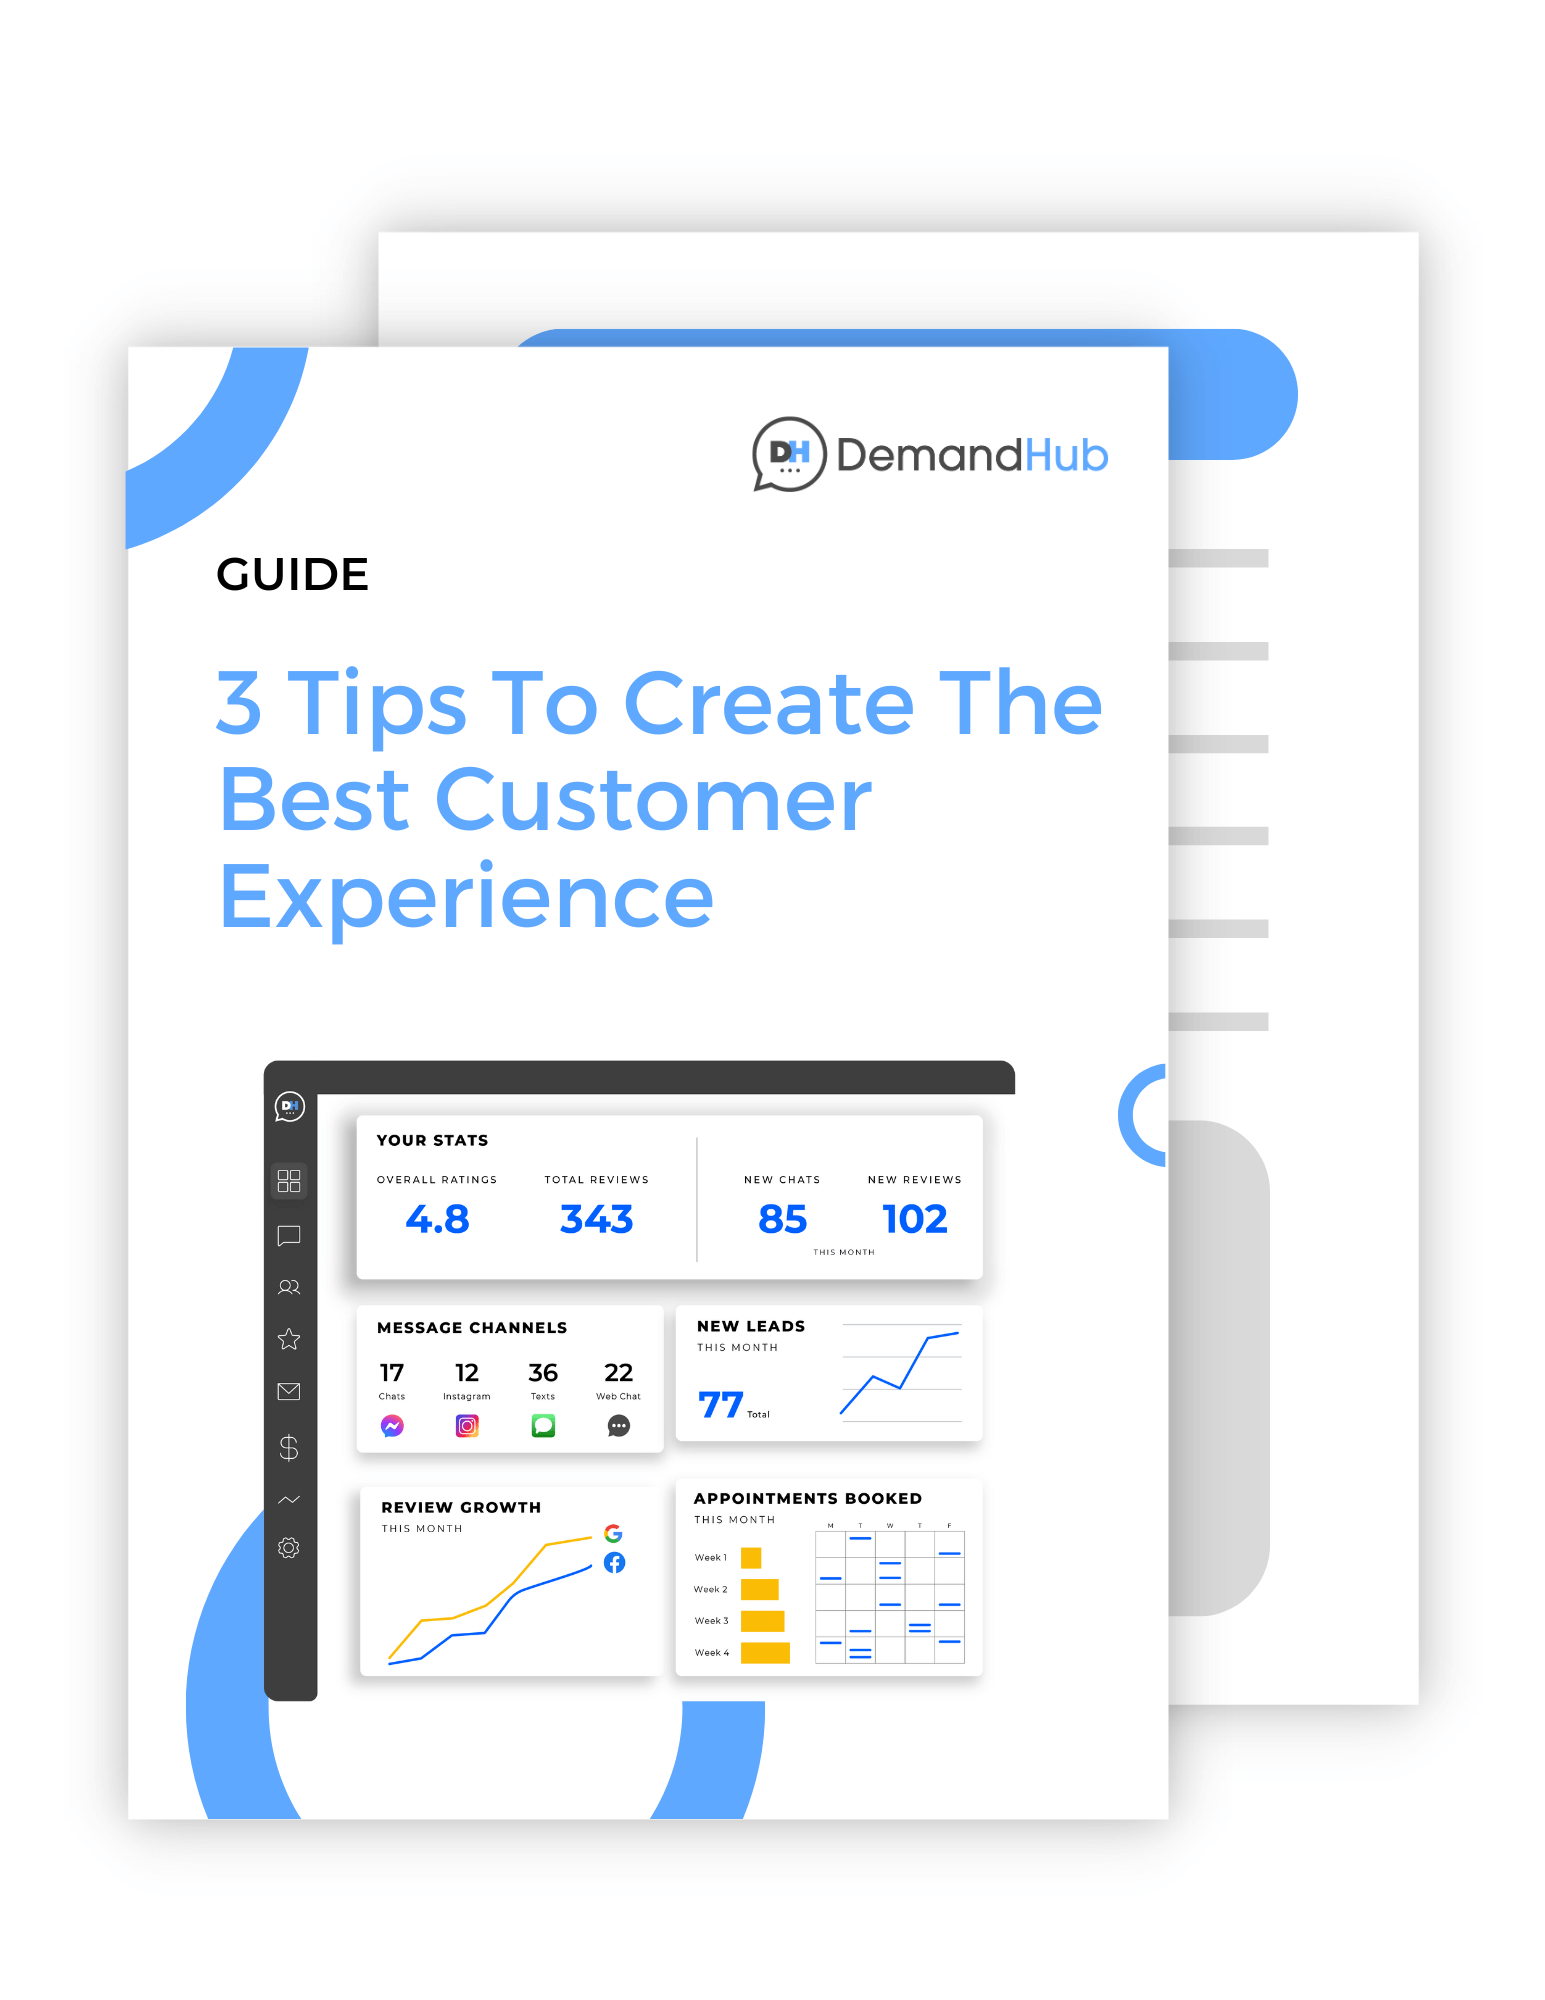 3 Tips You Can Implement Today to Build the Best Customer Experience